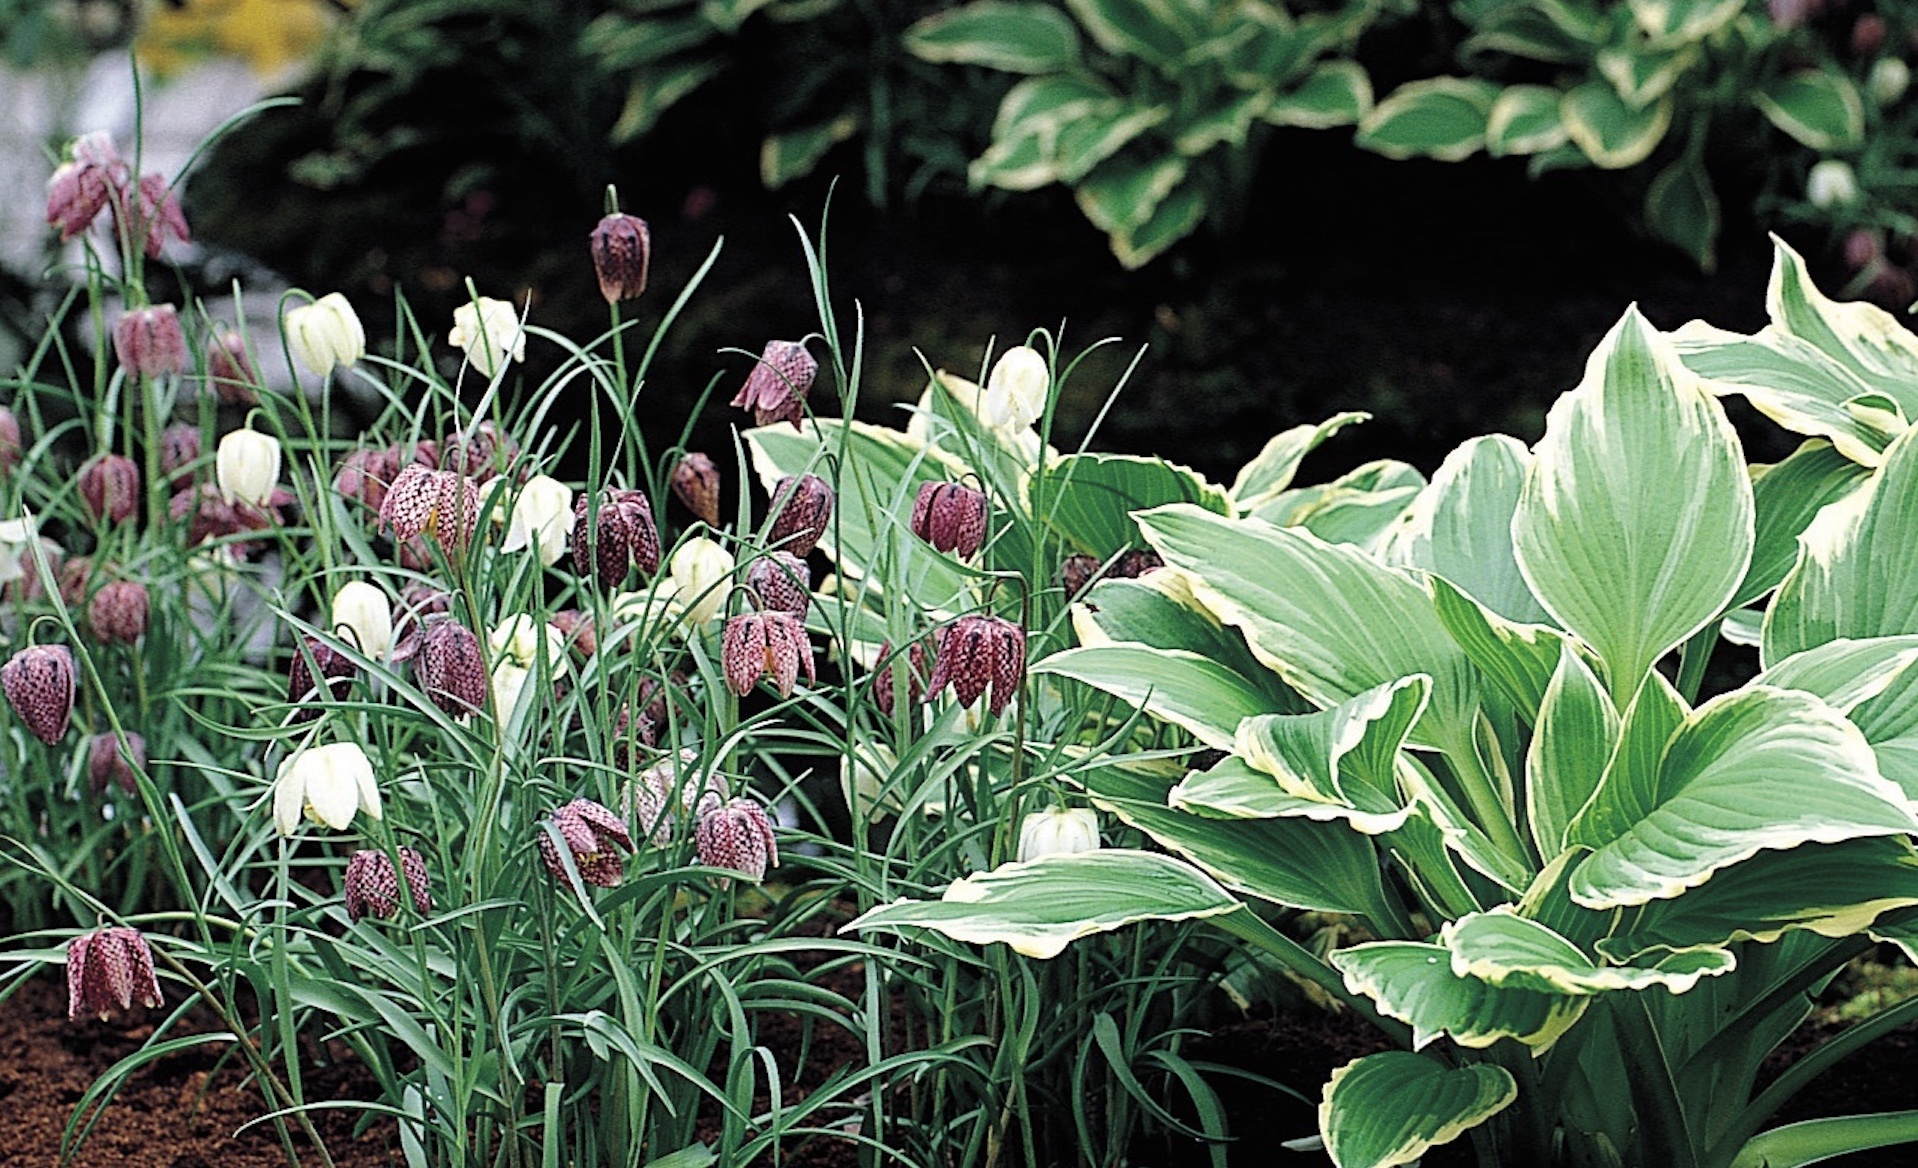 Guinea hen fritillary flowers planted with hosta in spring.